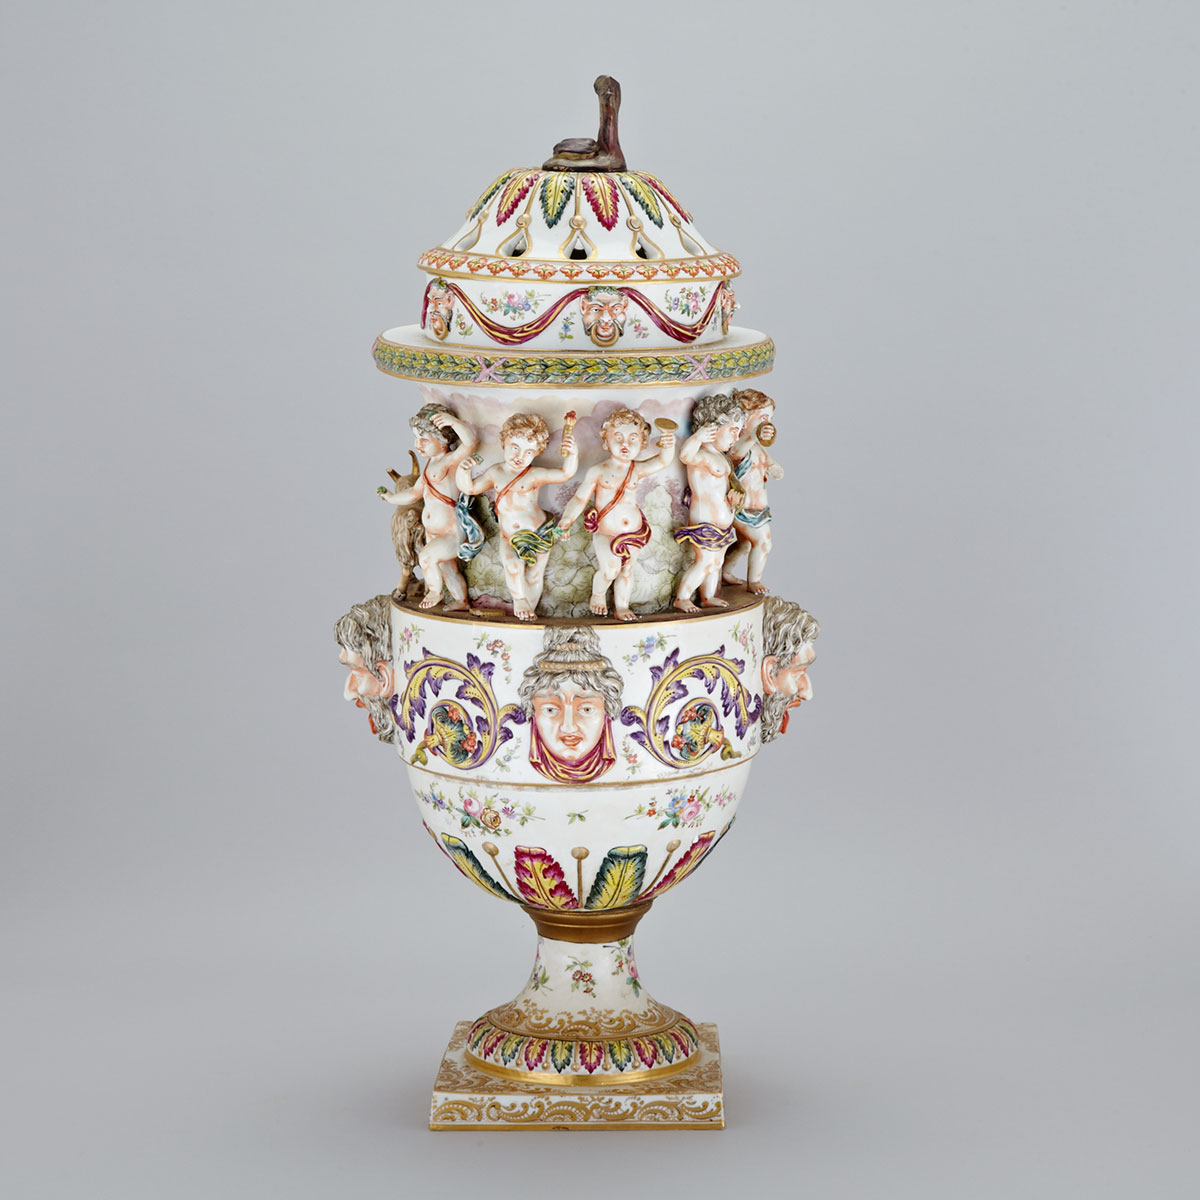 ‘Naples’ Large Covered Urn, late 19th century